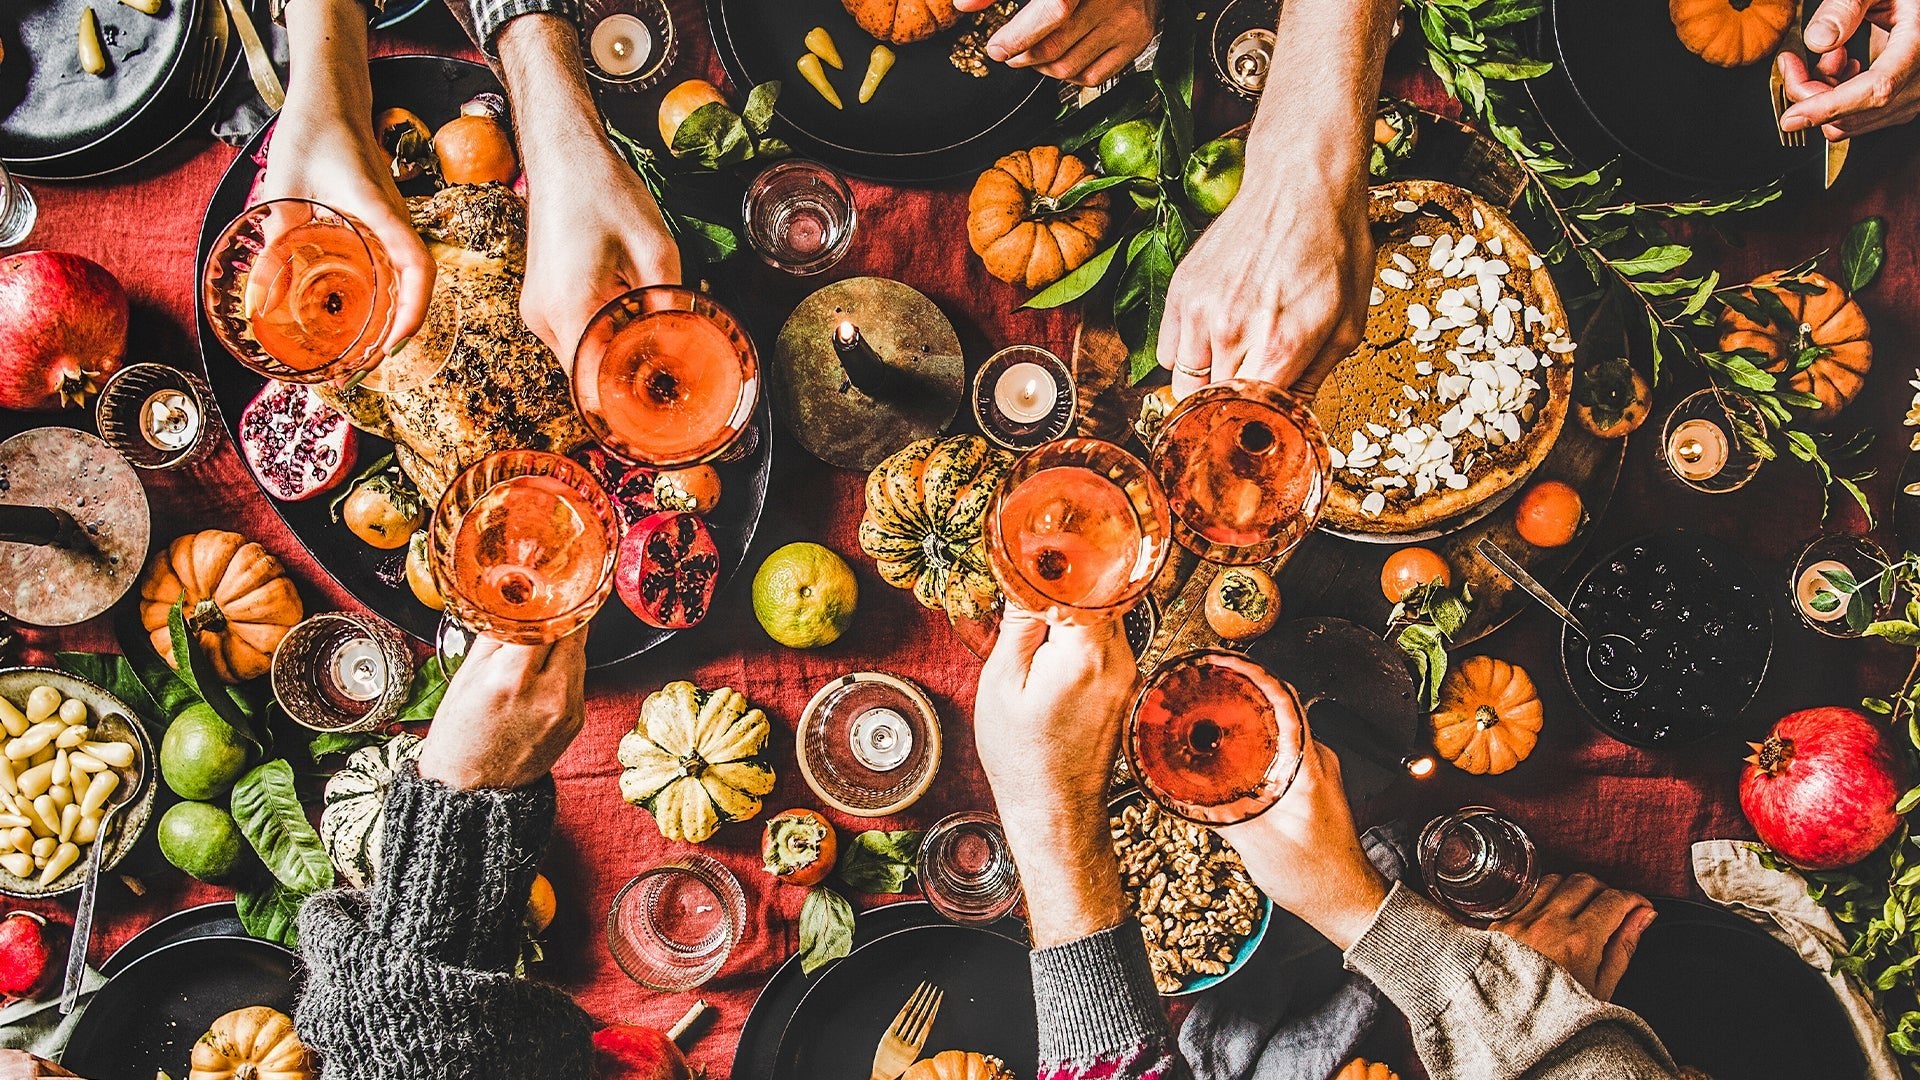 How To Host An Eco-Friendly Friendsgiving Your Besties Will Love - Marley's Monsters